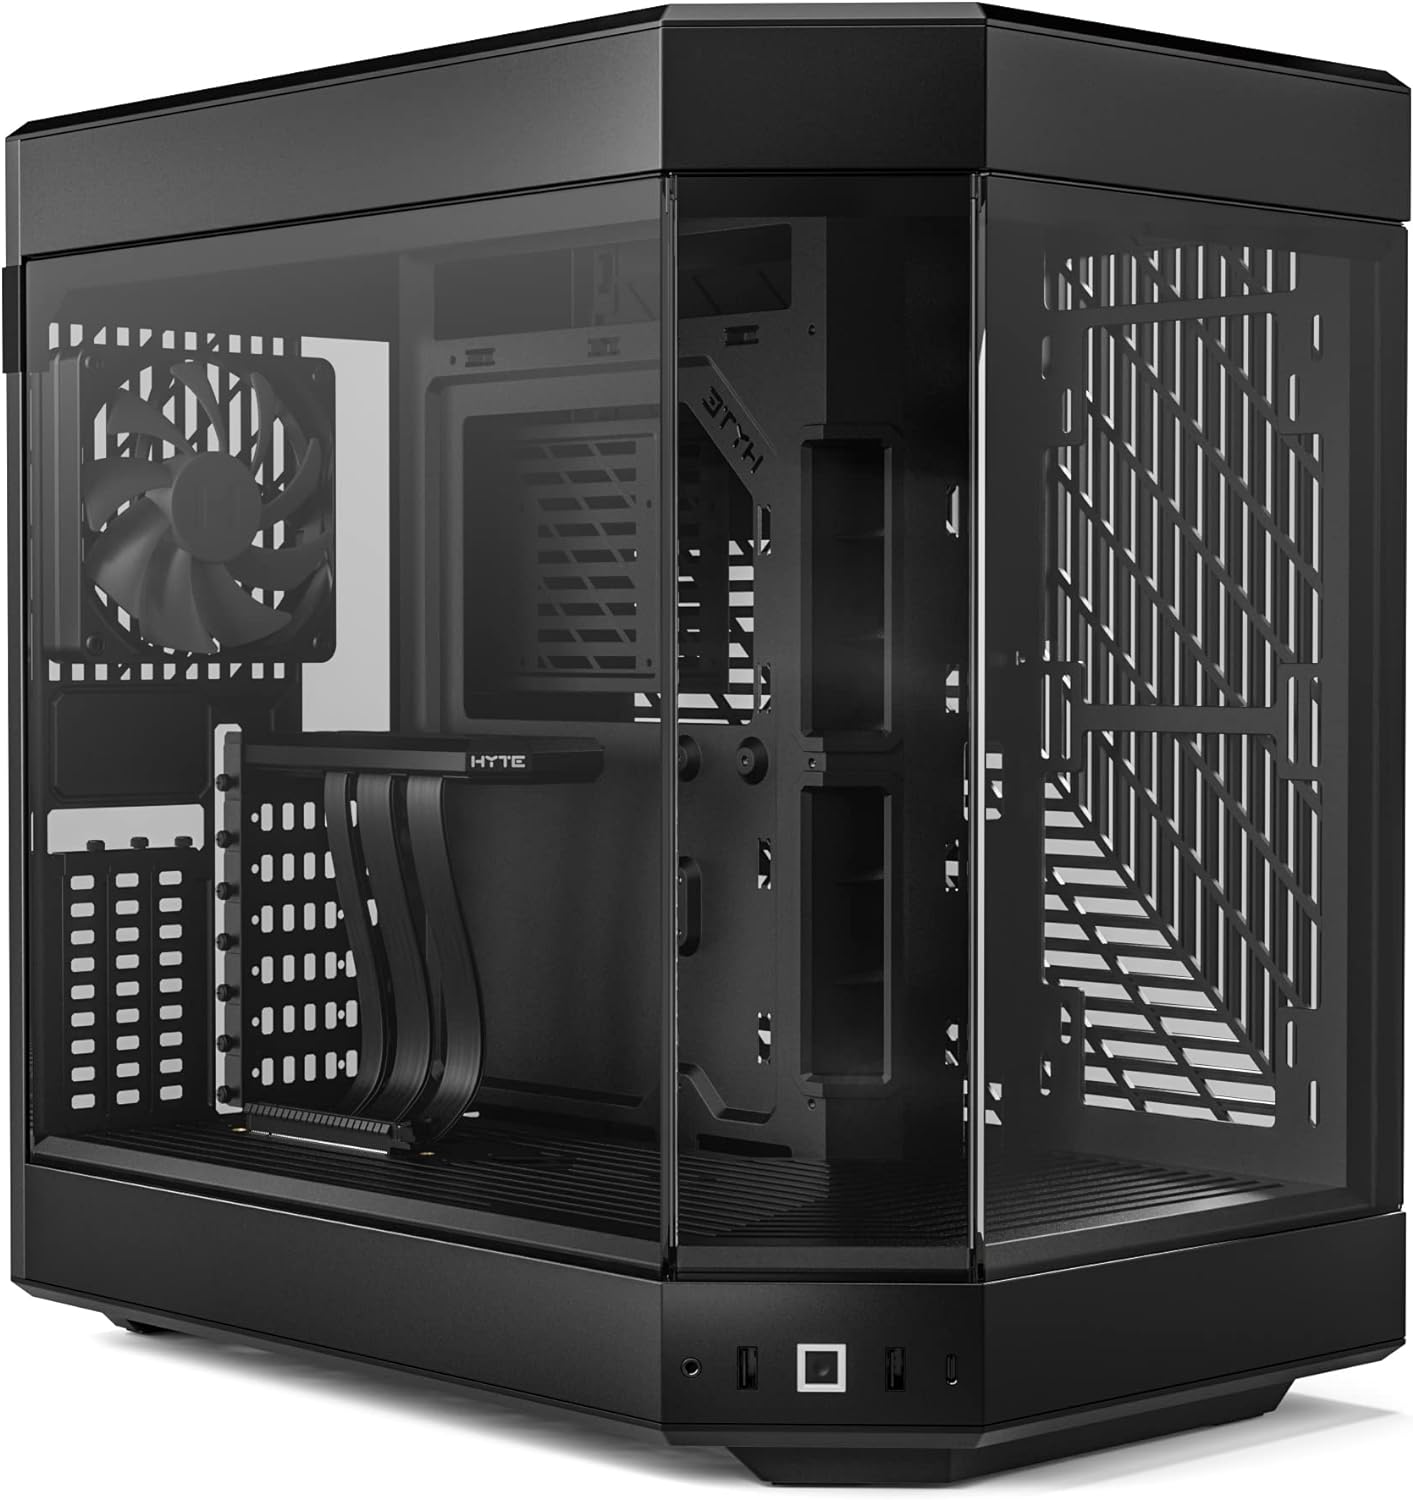 SKU: 0848604042855, Barcode: 848604042855 - HYTE Y60 Modern Aesthetic Mid-Tower ATX Gaming Case - Tempered Glass, PCIE 4.0 Riser Cable - Black: Panoramic tempered glass design for stunning display potential.